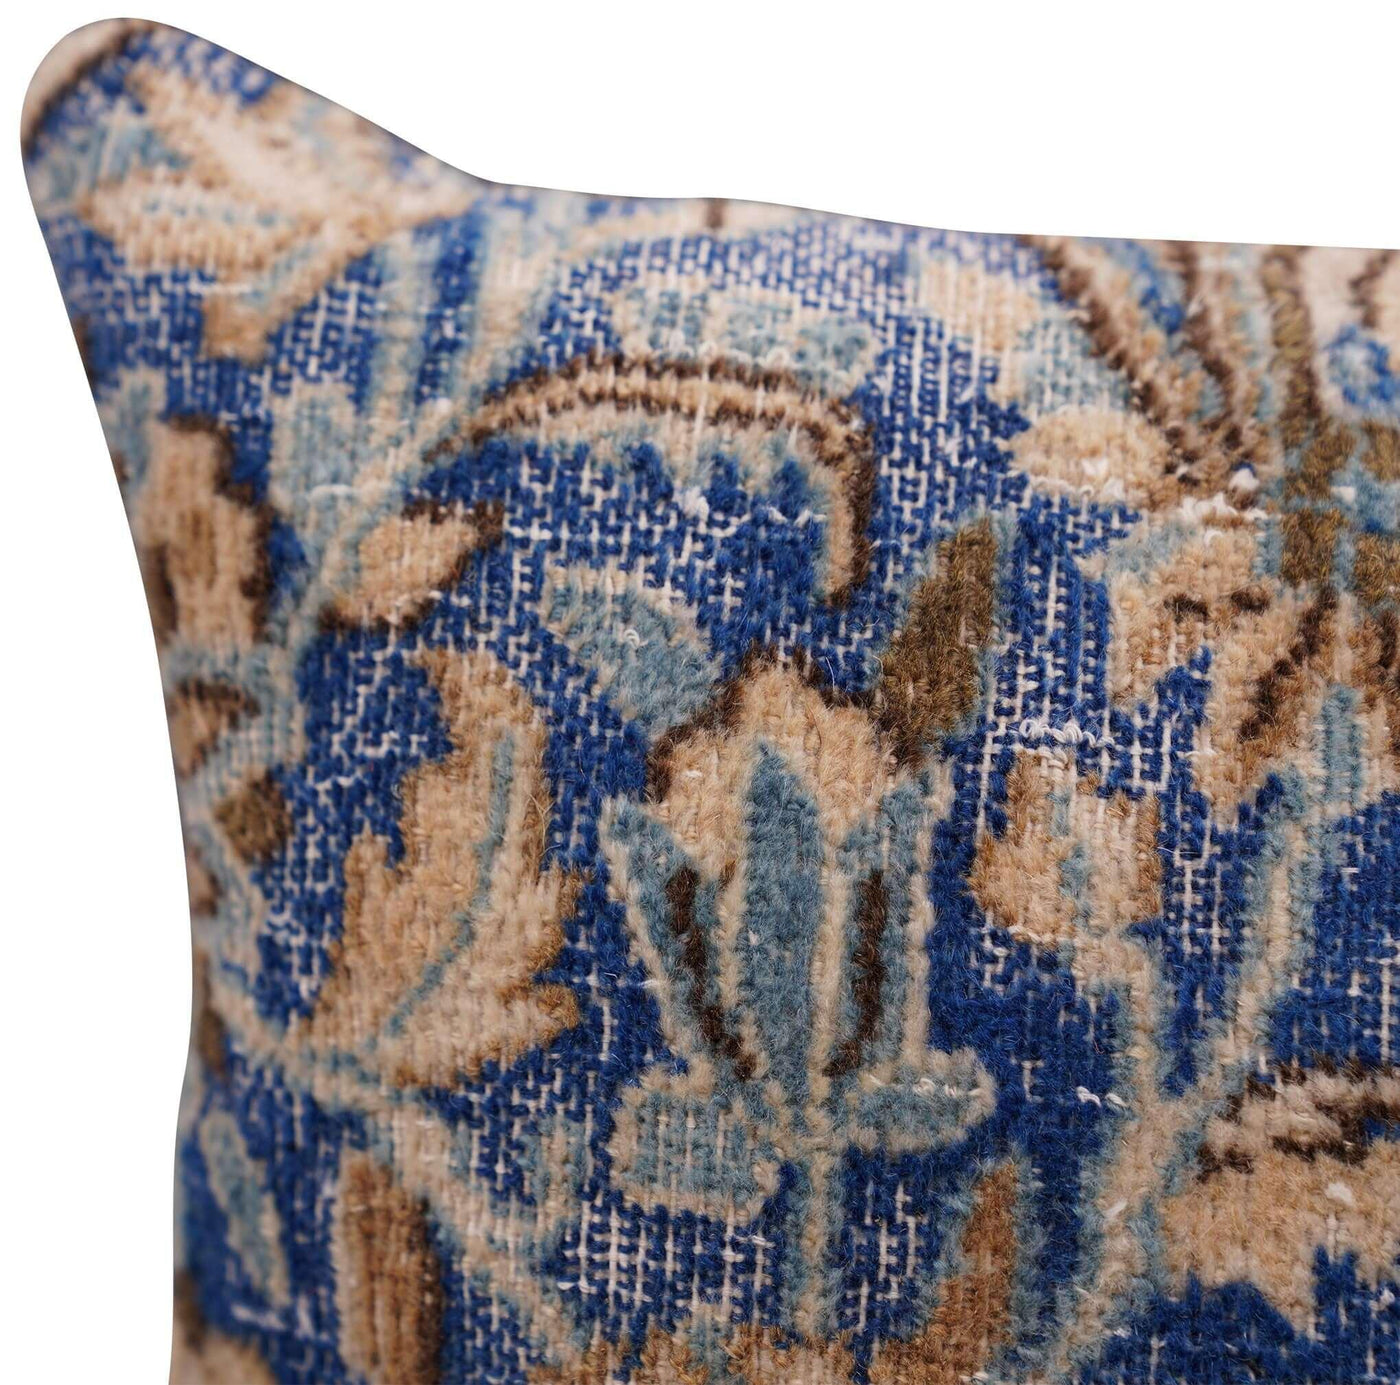 Canvello Antique Rug Blue And Brown Throw Pillows - 18"x18"